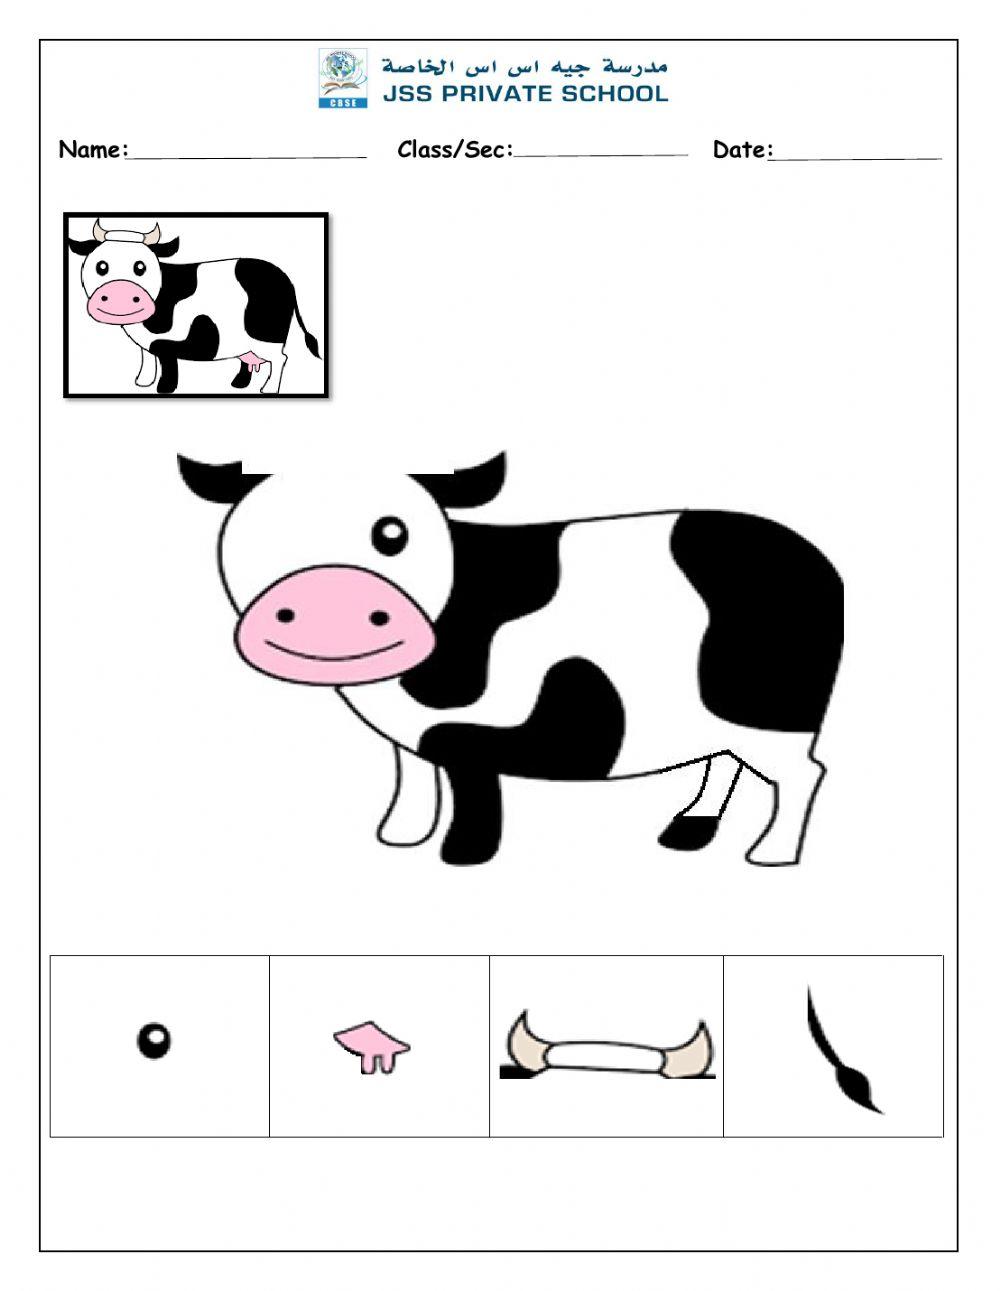 Match the body parts of cow